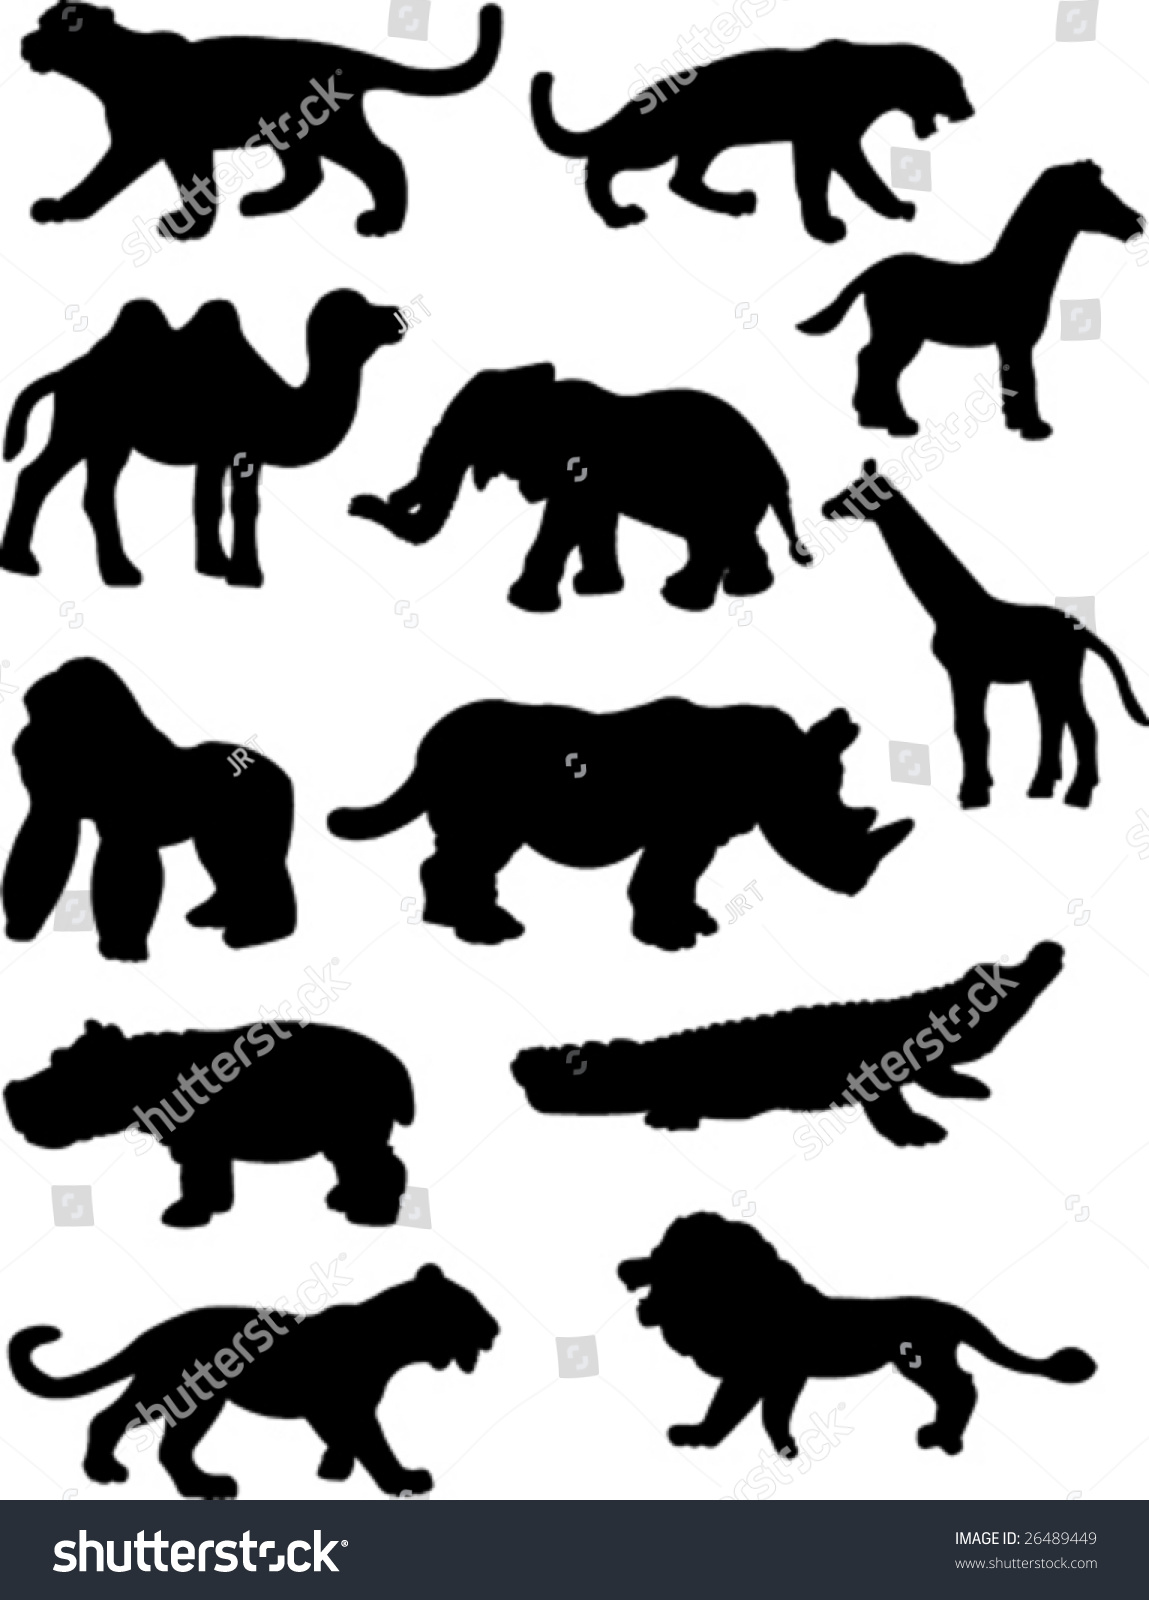 Download Jungle Animal Silhouettes Stock Vector 26489449 - Shutterstock